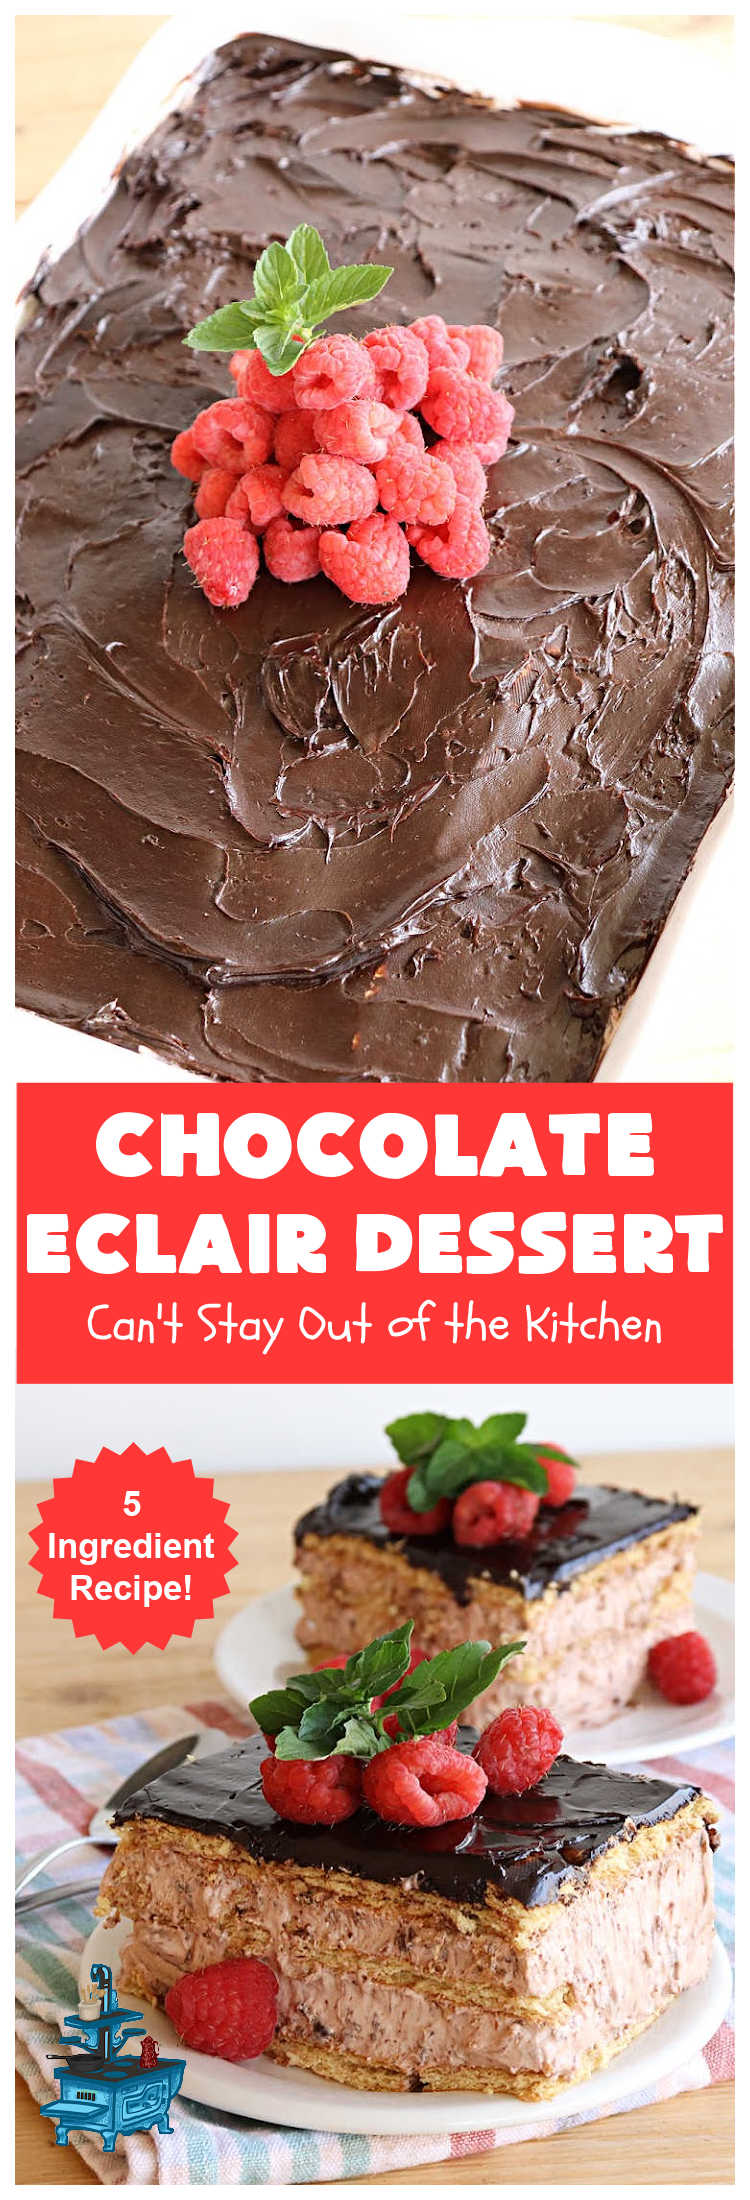 Chocolate Éclair Dessert | Can't Stay Out of the Kitchen | this easy #dessert uses only 5 ingredients & takes less than 10 minutes to whip up! It tastes heavenly--just like eating #chocolate #éclairs!  It's perfect for company, family or #holiday dinners. You'll find yourself  drooling over every bite. Everyone will want seconds with this luscious  #ChocolateDessert! #ChocolatePudding #5IngredientRecipe #ChocolateÉclairs #ChocolateÉclairDessert